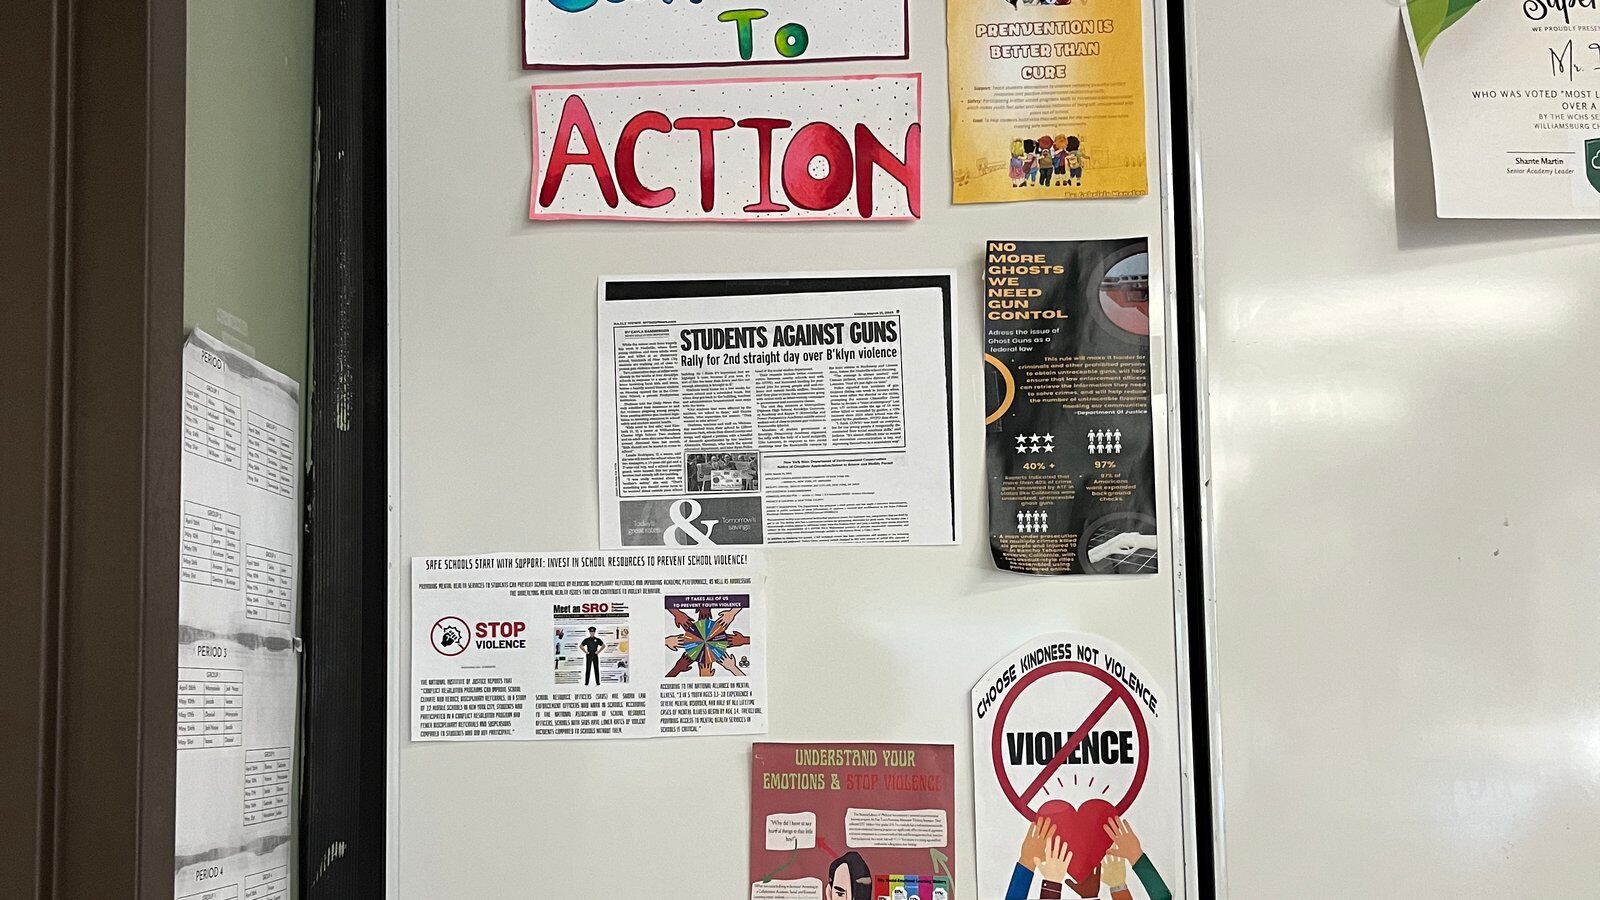 Seven signs against gun violence are affixed to a white board at Williamsburg Charter High School, including bright letters reading, “Call to Action.”